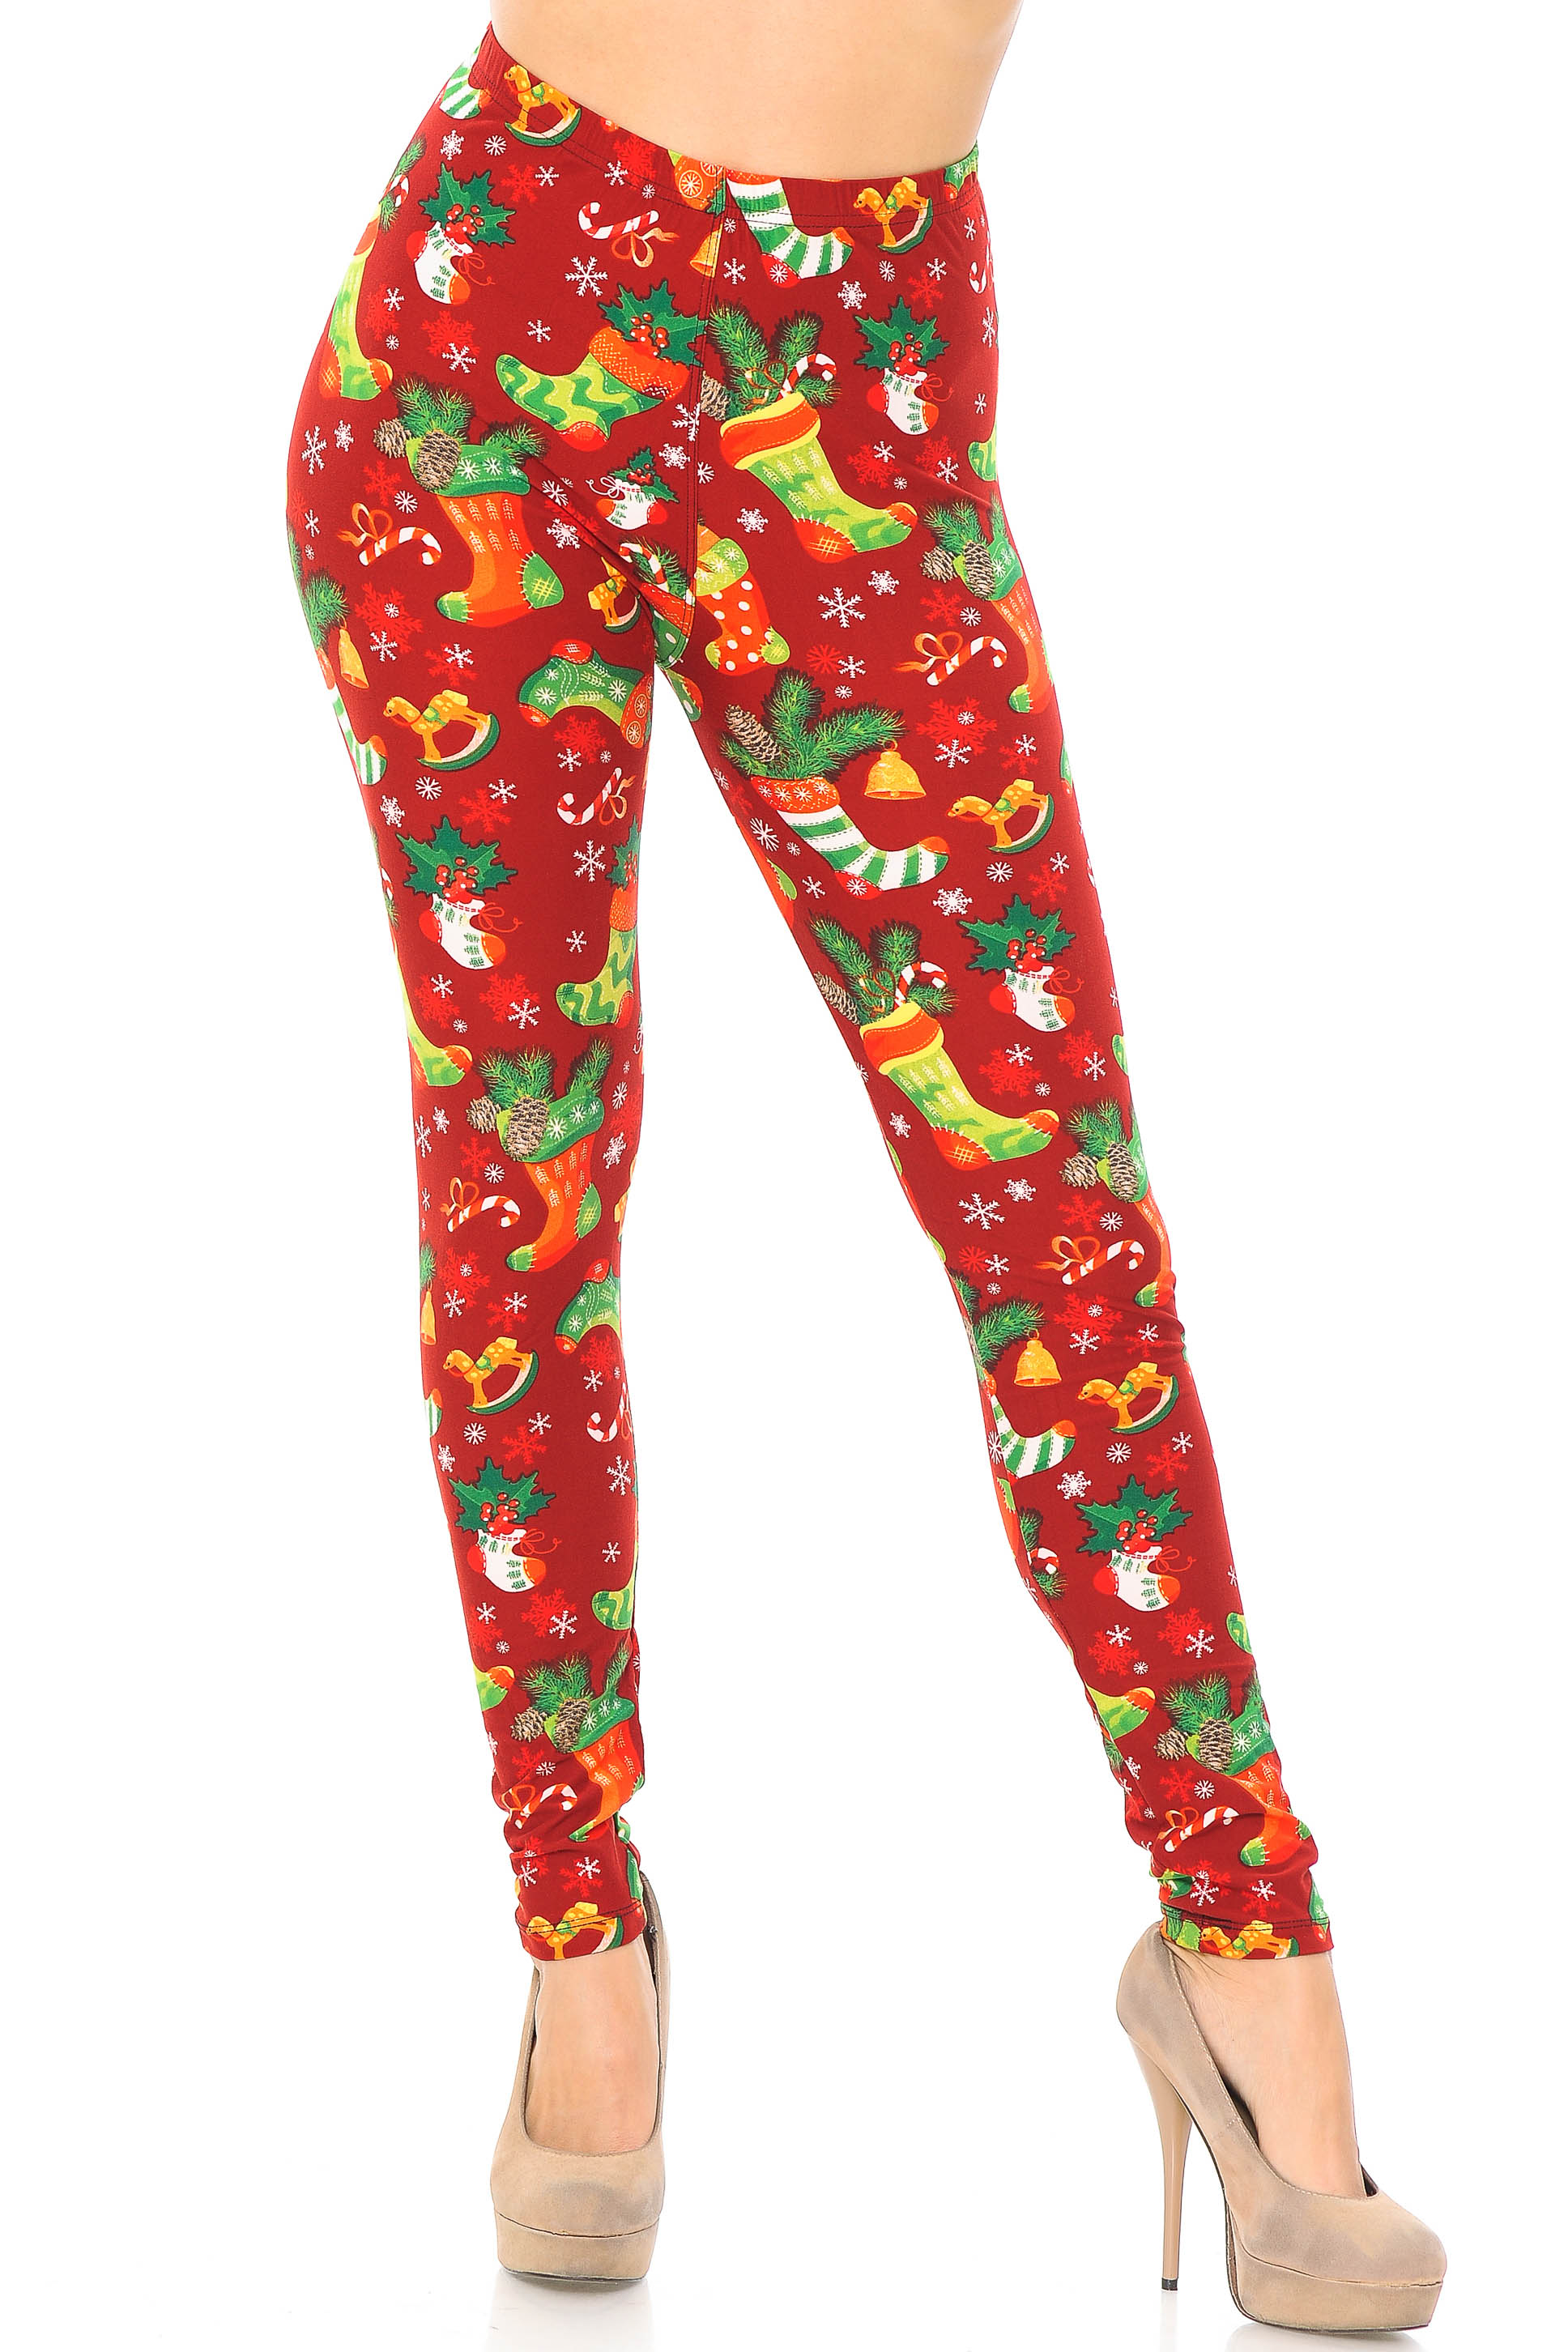 Wholesale Buttery Smooth Ruby Red Christmas Stocking Extra Plus Size Leggings - 3X-5X